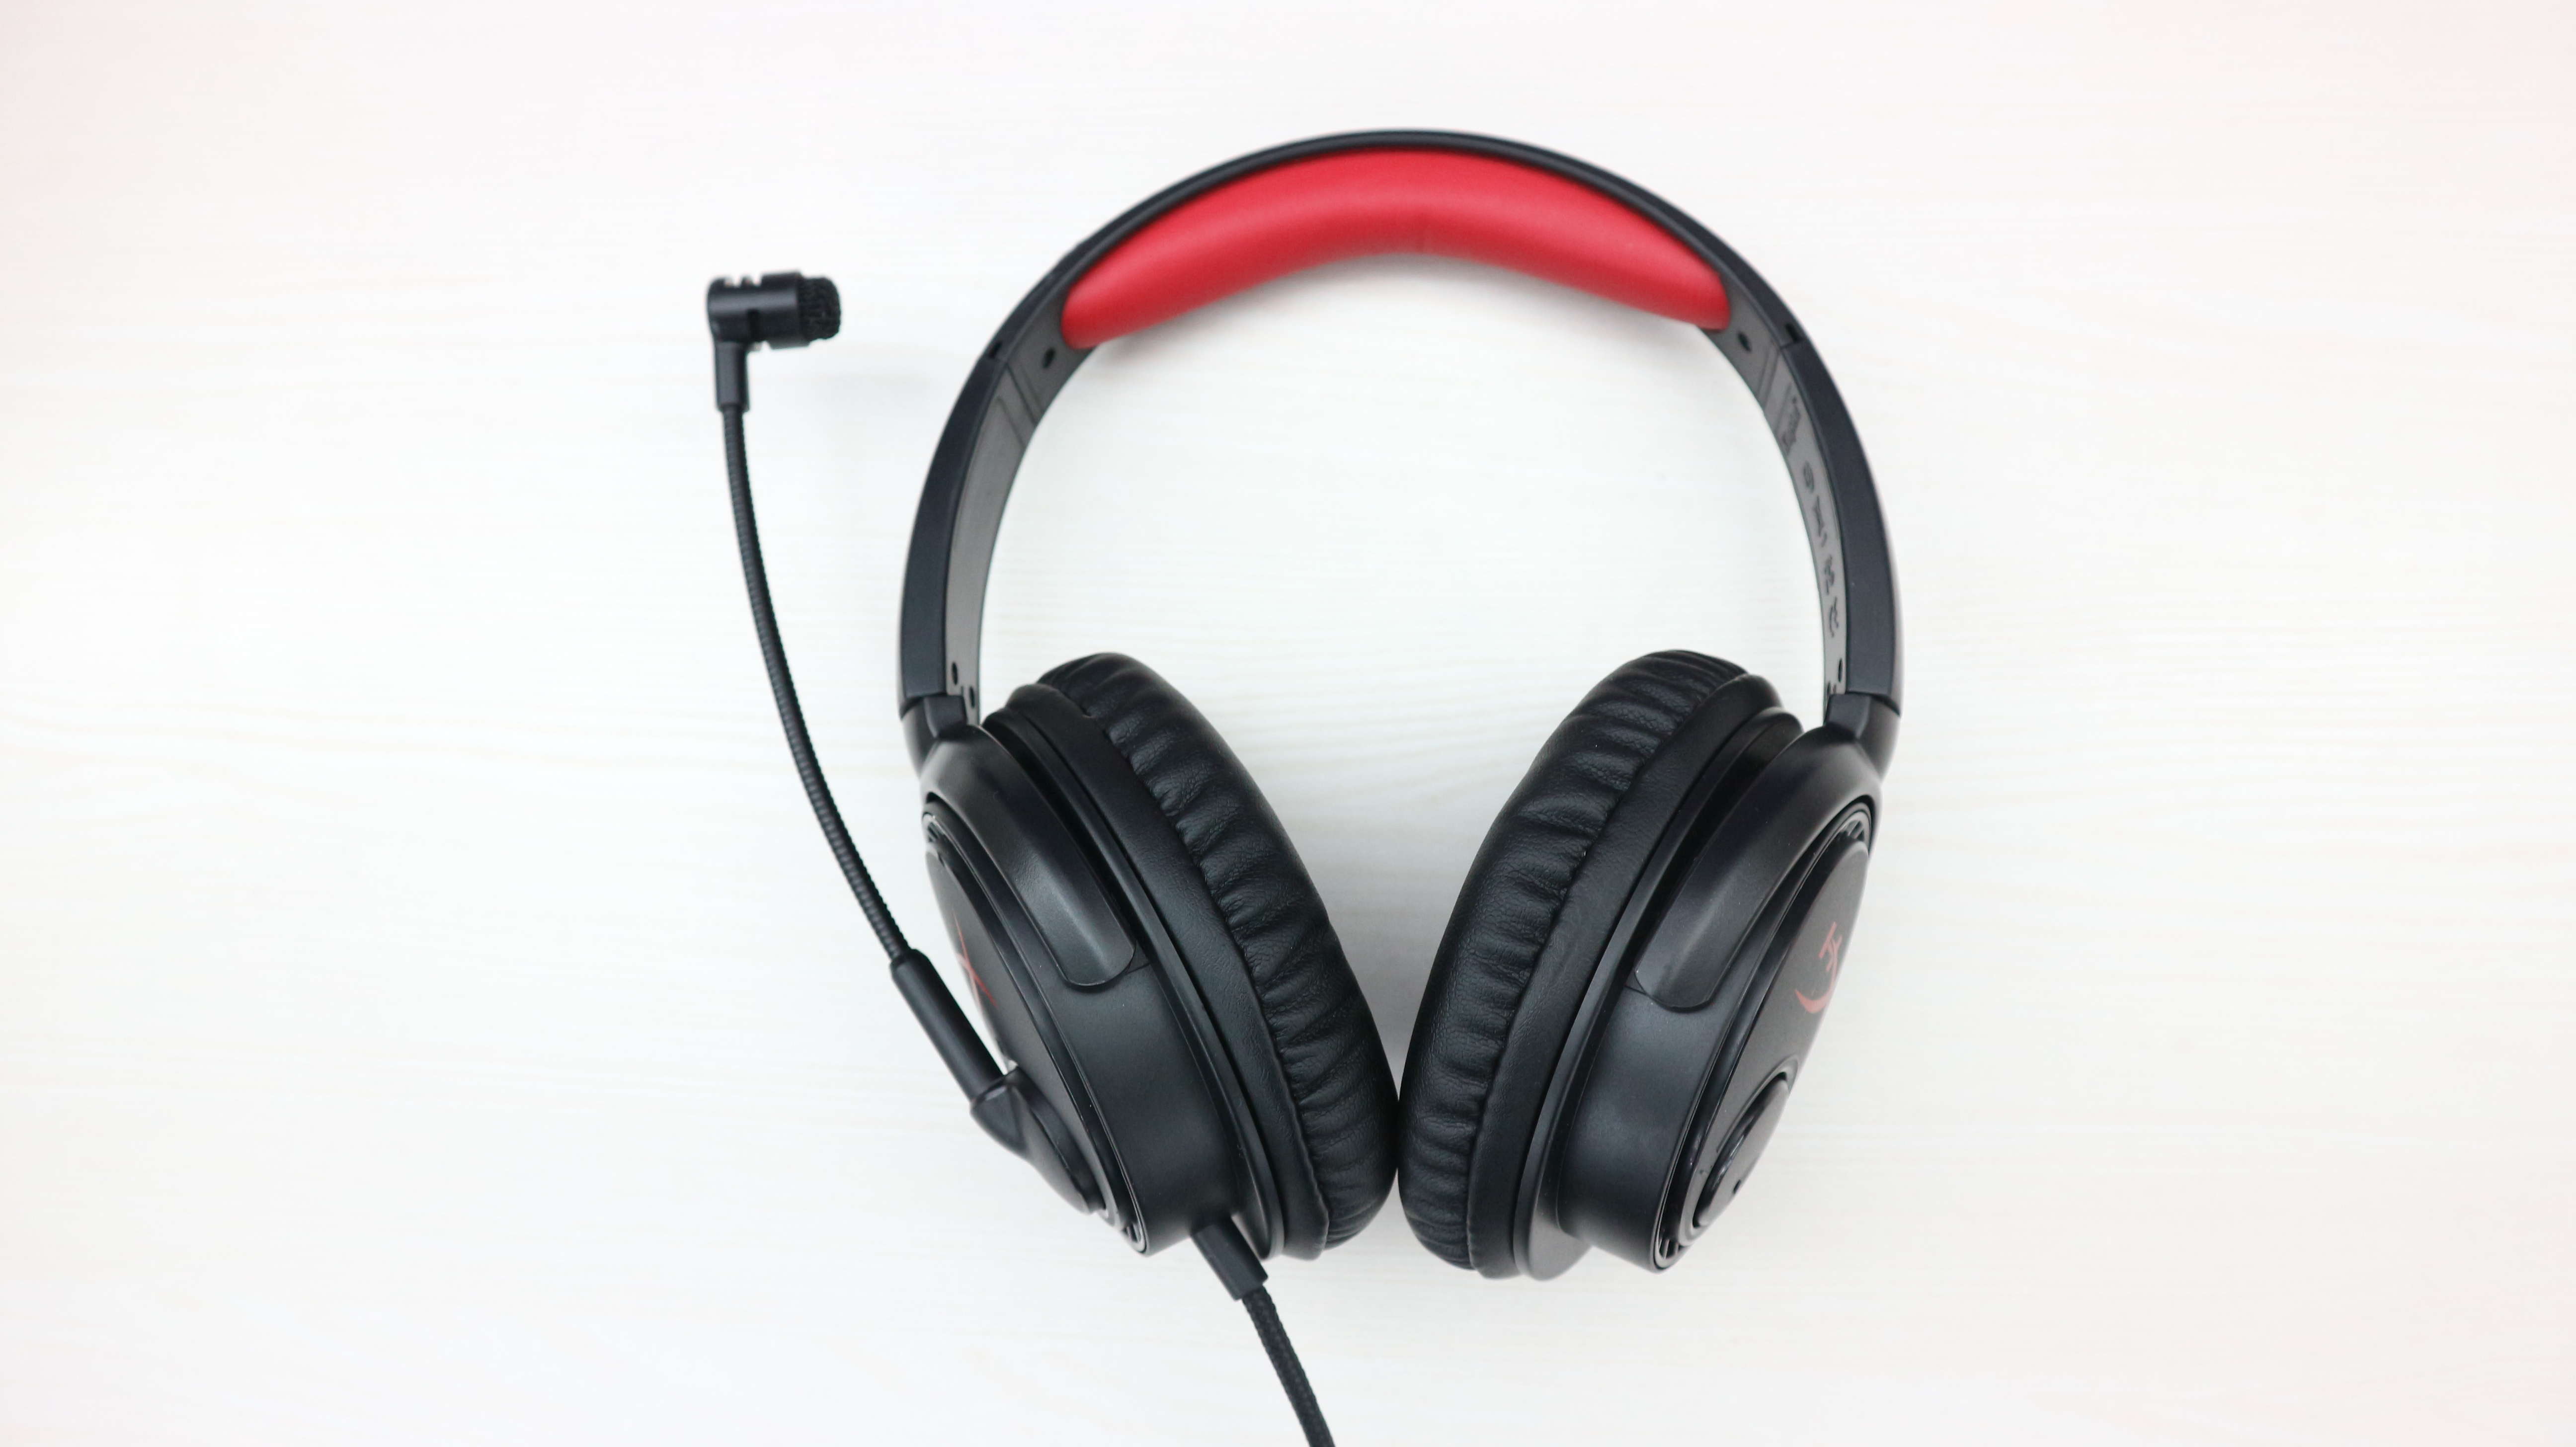 Kingston HyperX Cloud Drone headphones review: The good new budget headphones for gamers